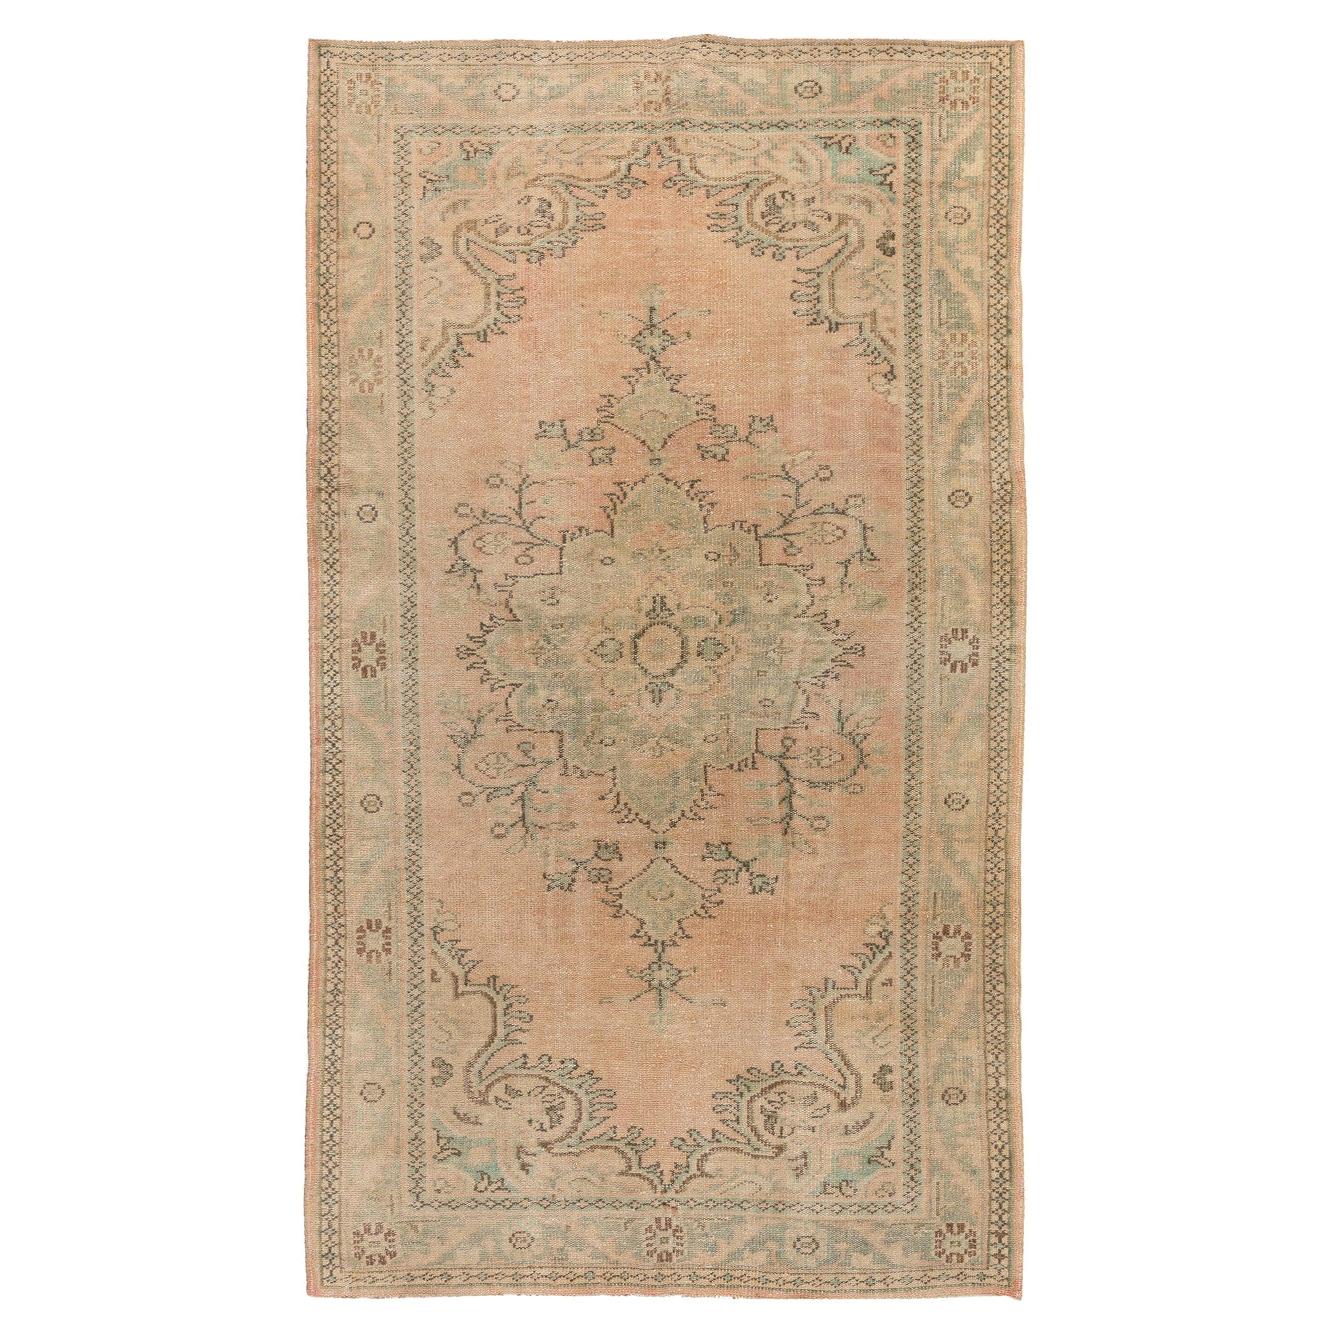 5.7x9.7 Ft Vintage Handmade Oushak Area Rug in Soft, Faded Colors